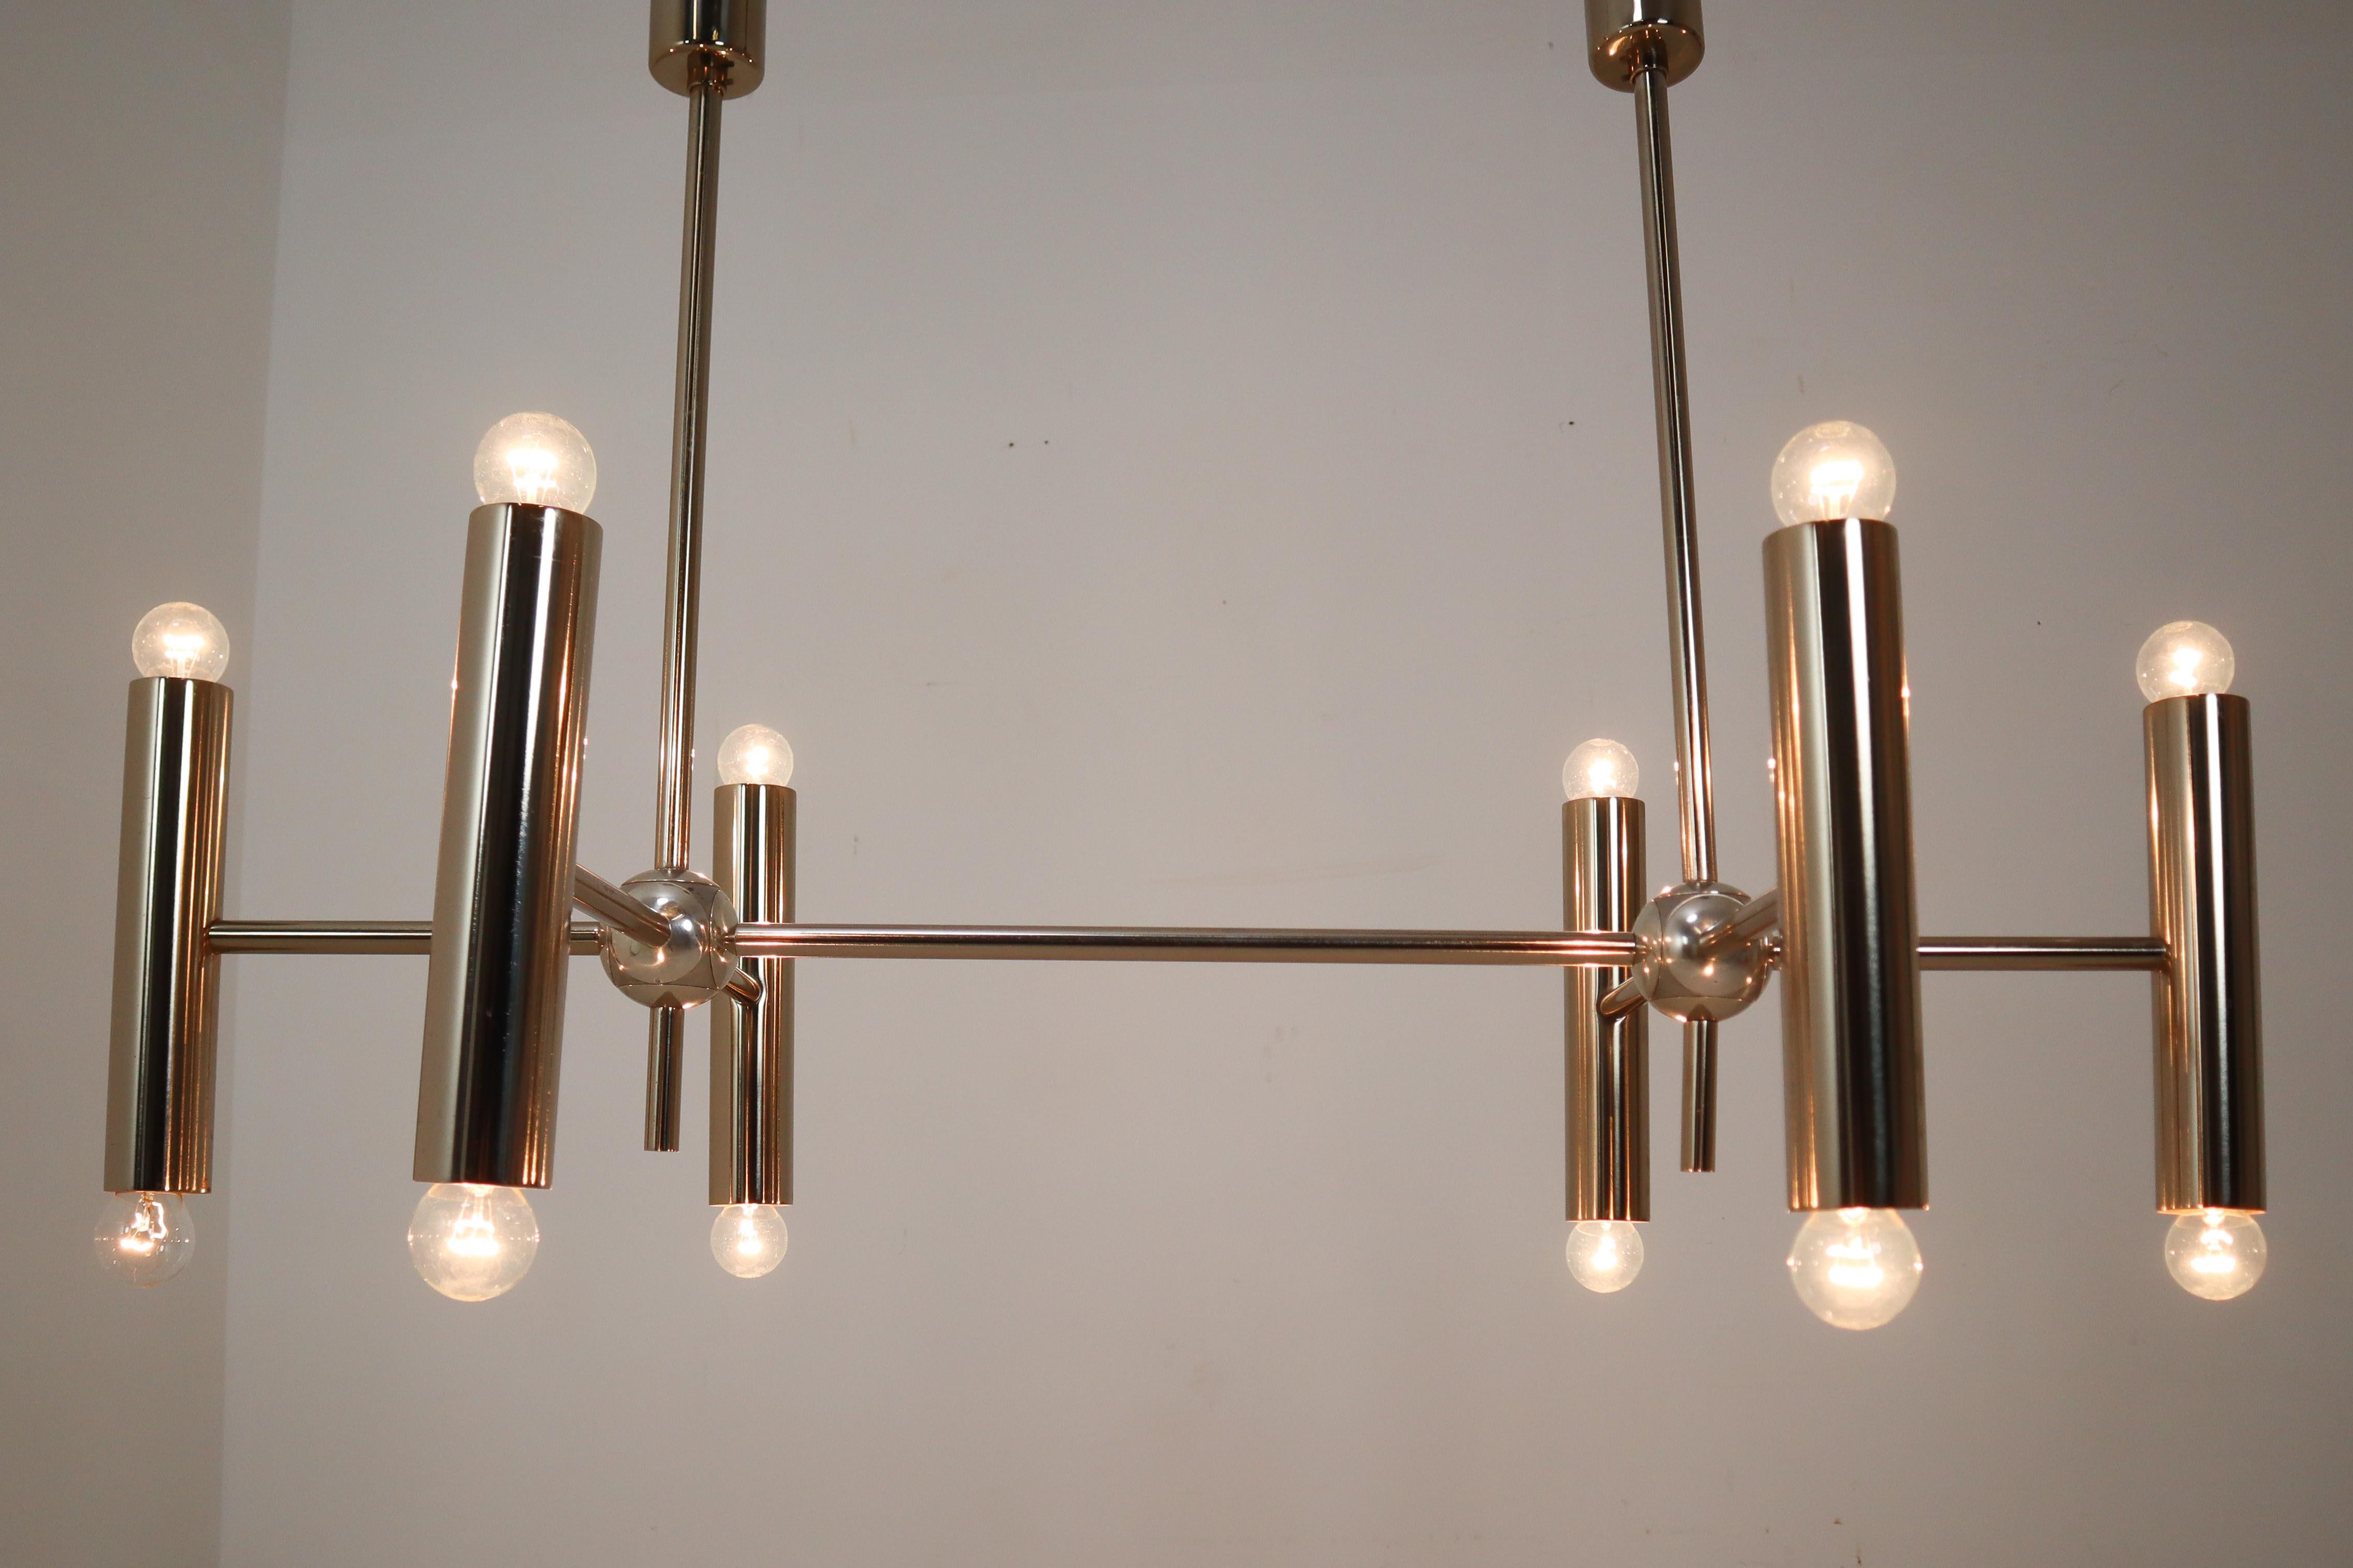 Mid-Century Modernist large chandelier with contains twelve lights, arranged in a symmetrical pattern on both side of the tube. The fixture is made of metal/steel with a chrome patina. Therefore an interesting color is visible on the metal. A warm